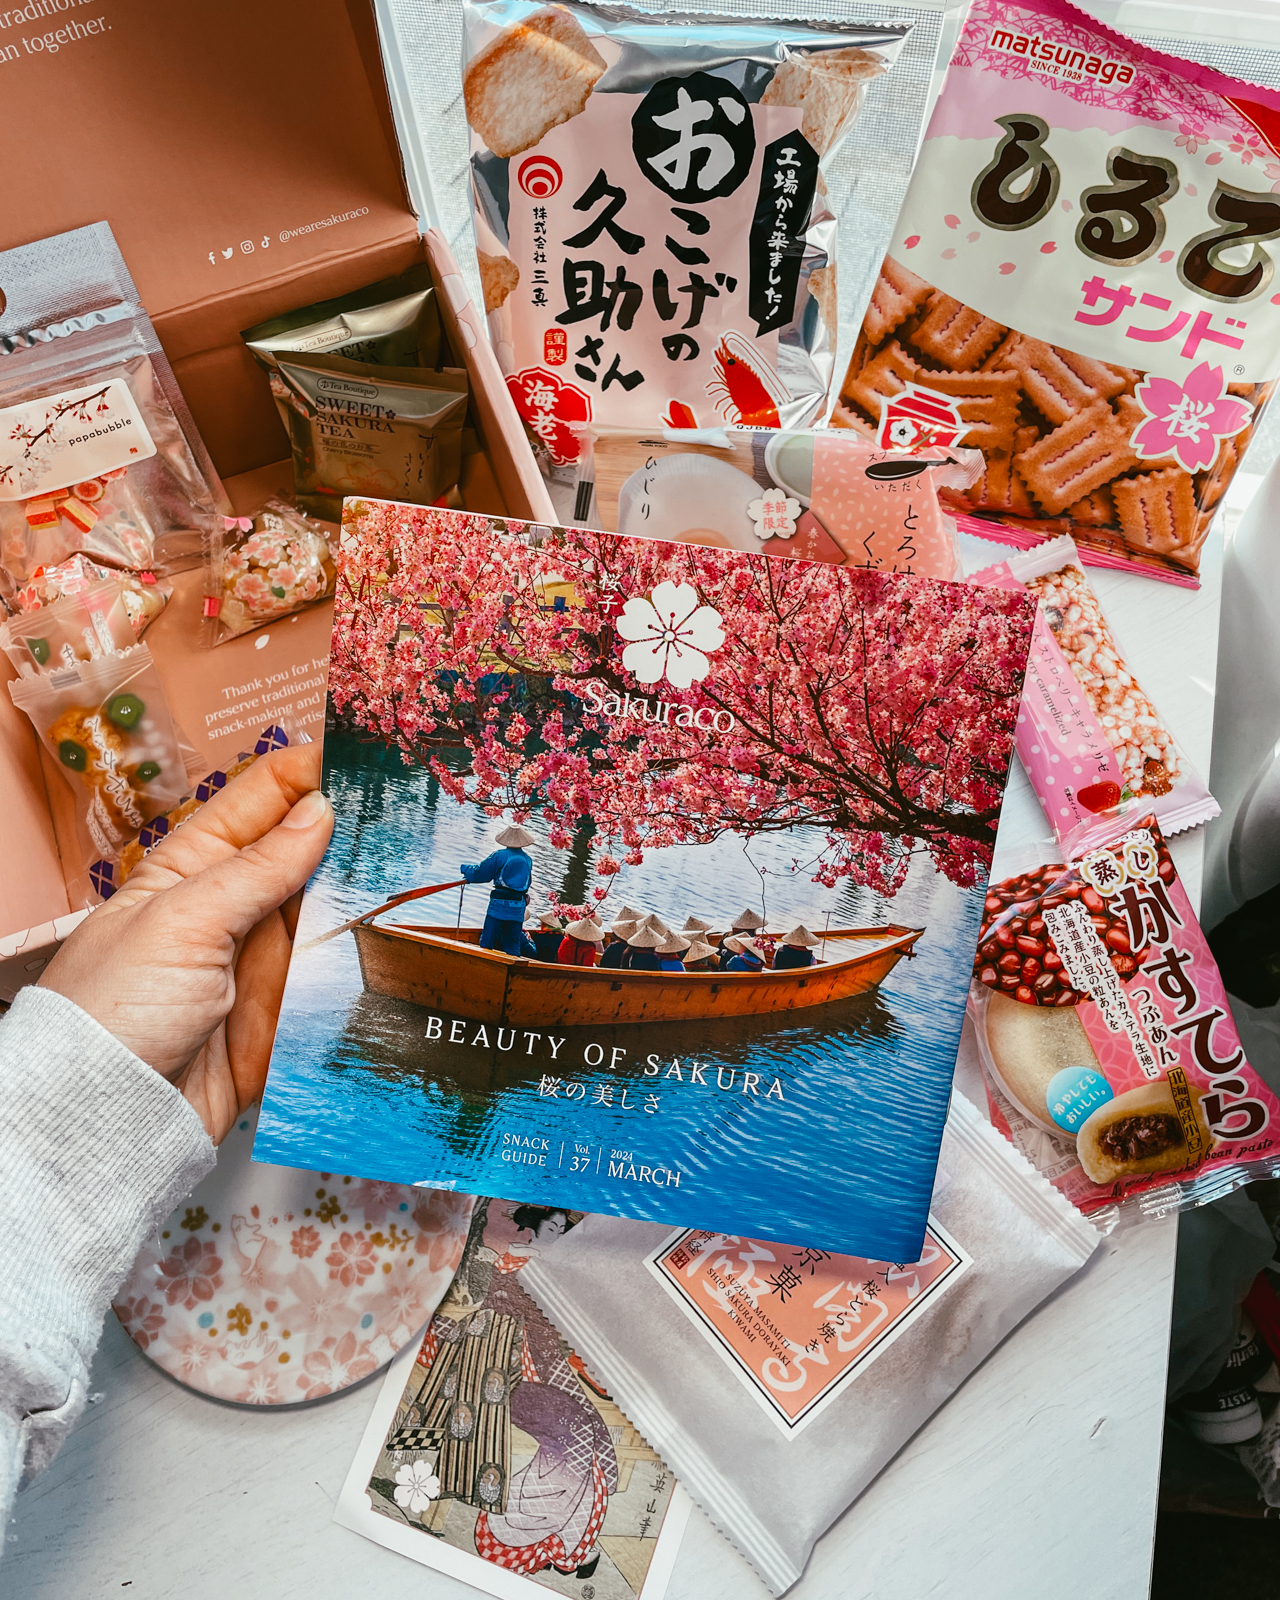 A look inside a subscription snack box of Japanese treats